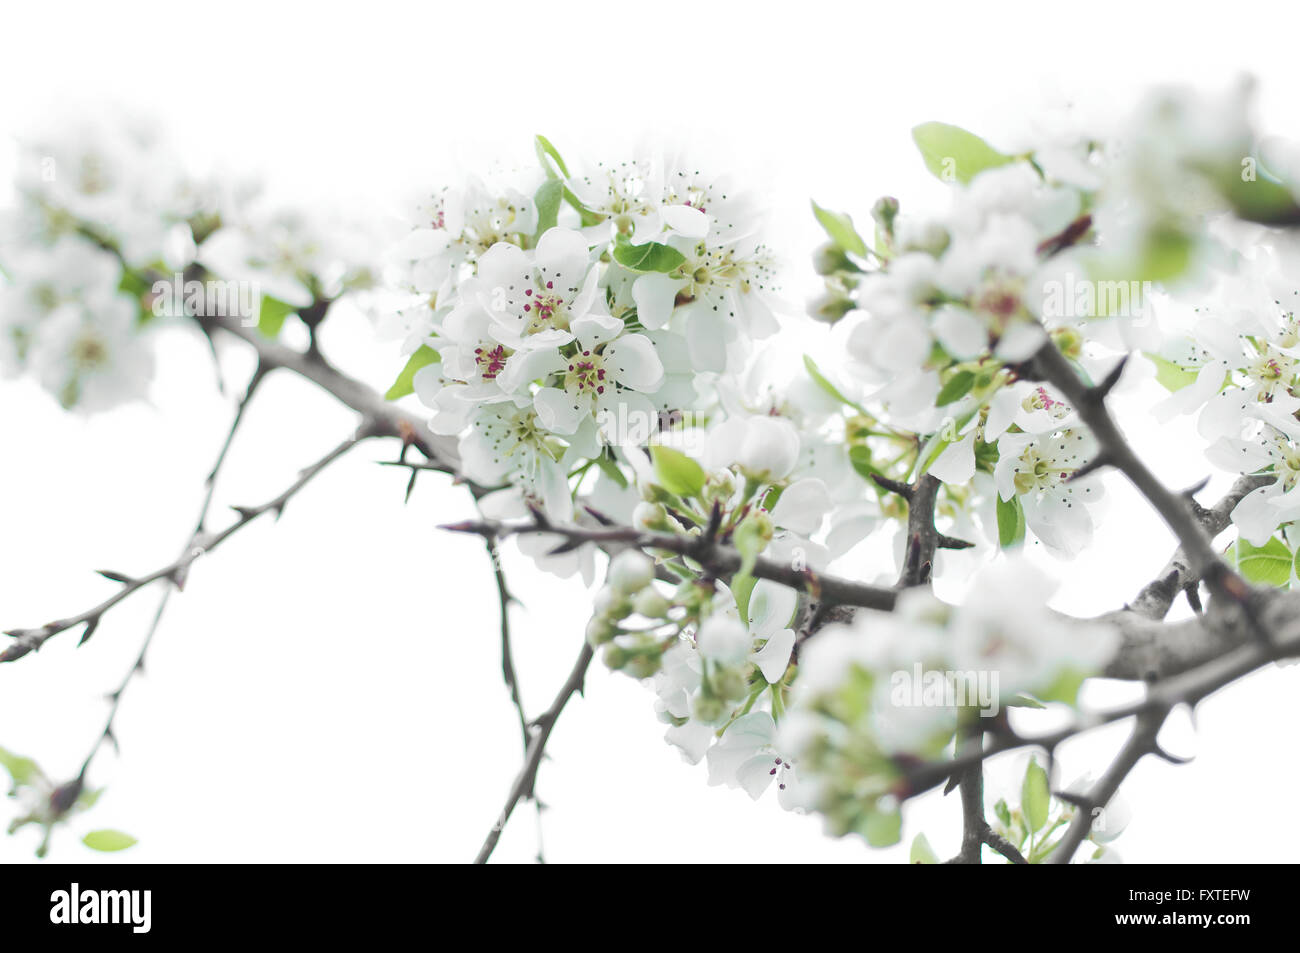 A branch of of blooming White Pear Flower Stock Photo